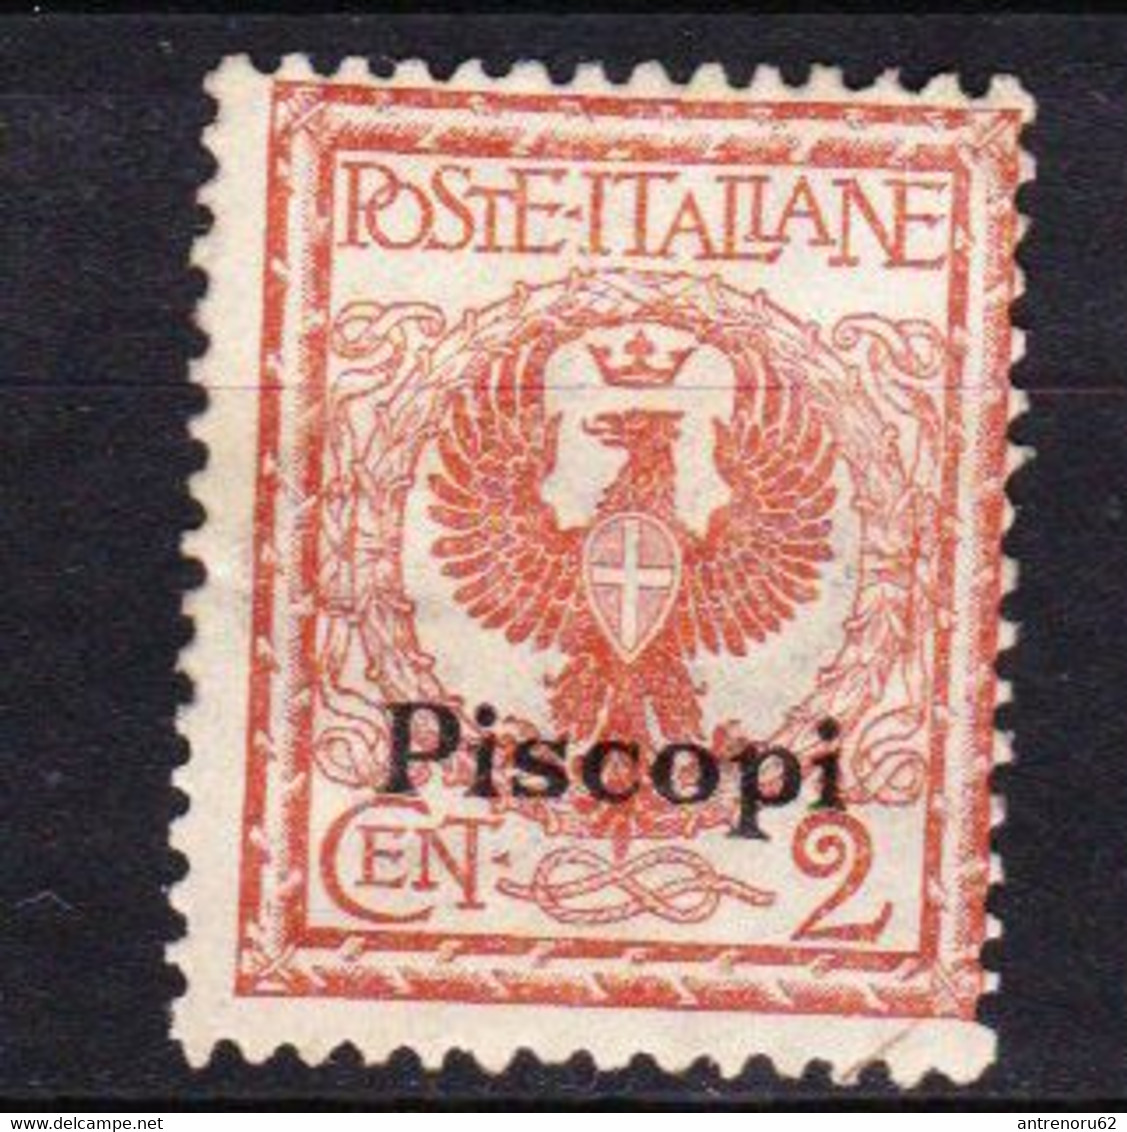 STAMPS-ITALY-1912-PISCOPI-UNUSED-MH*-SEE-SCAN - Aegean (Piscopi)